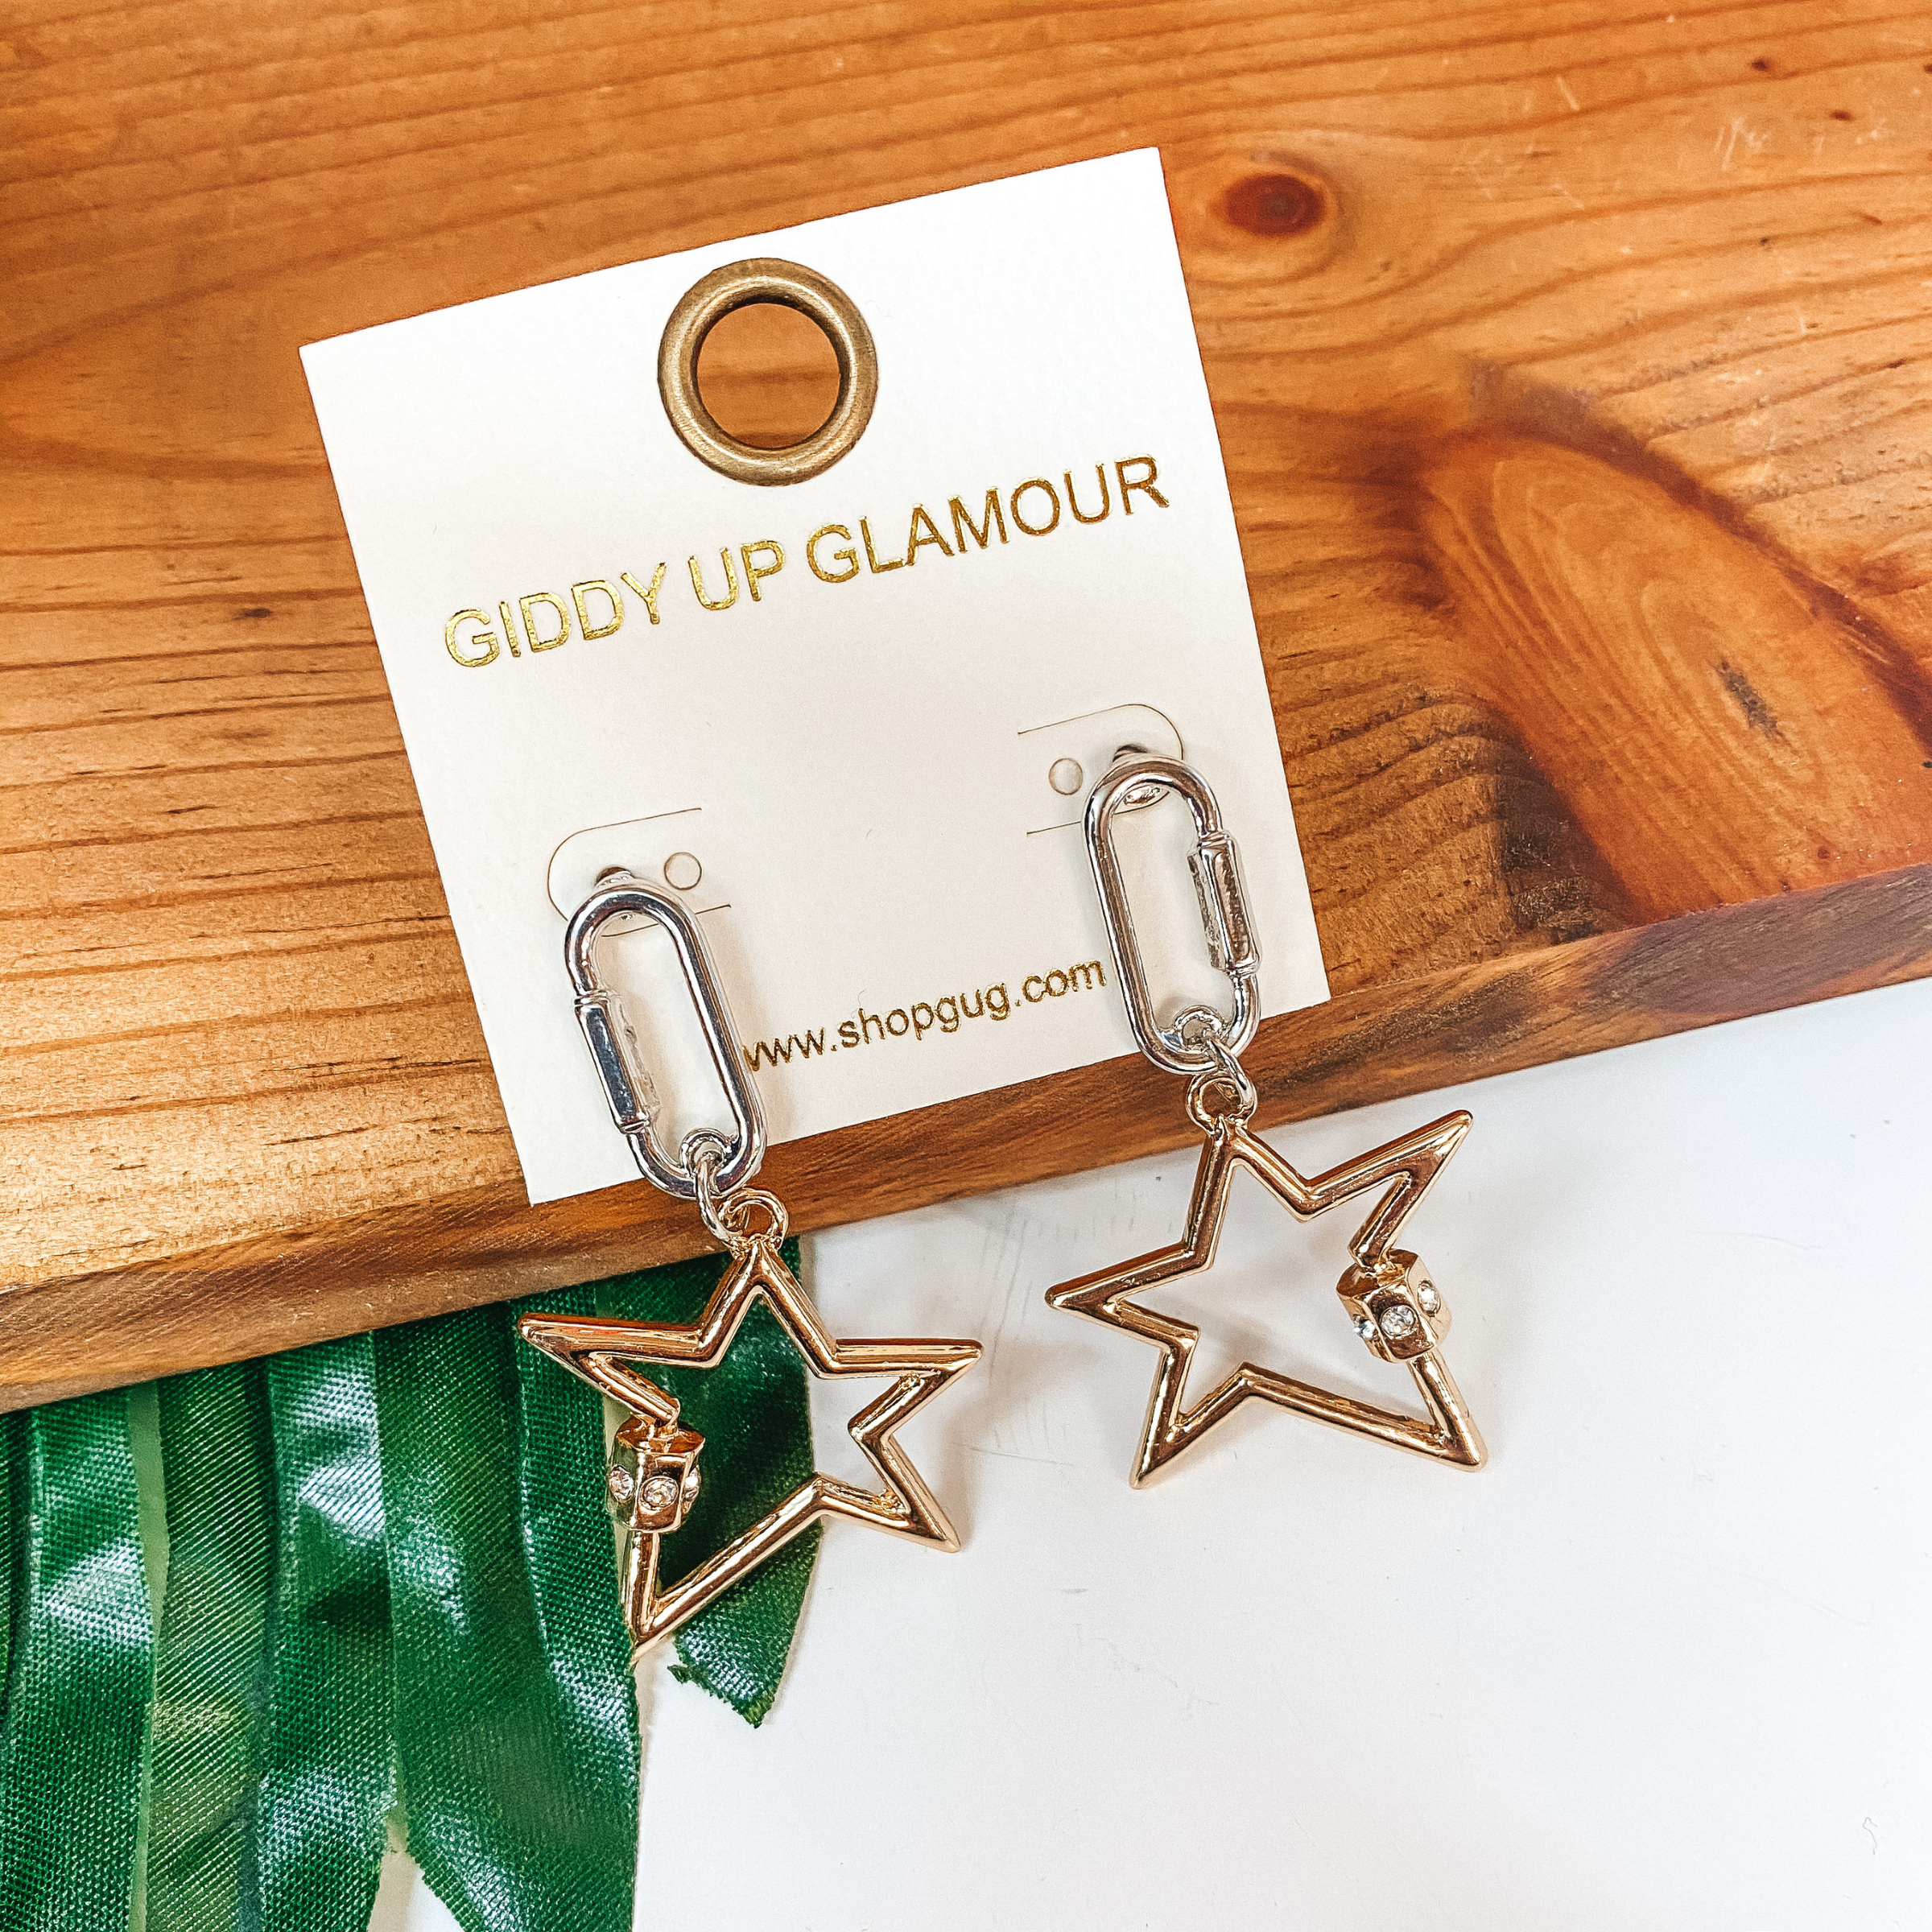 Catching Stars Star Dangle Earrings with Crystal Accents in Gold - Giddy Up Glamour Boutique